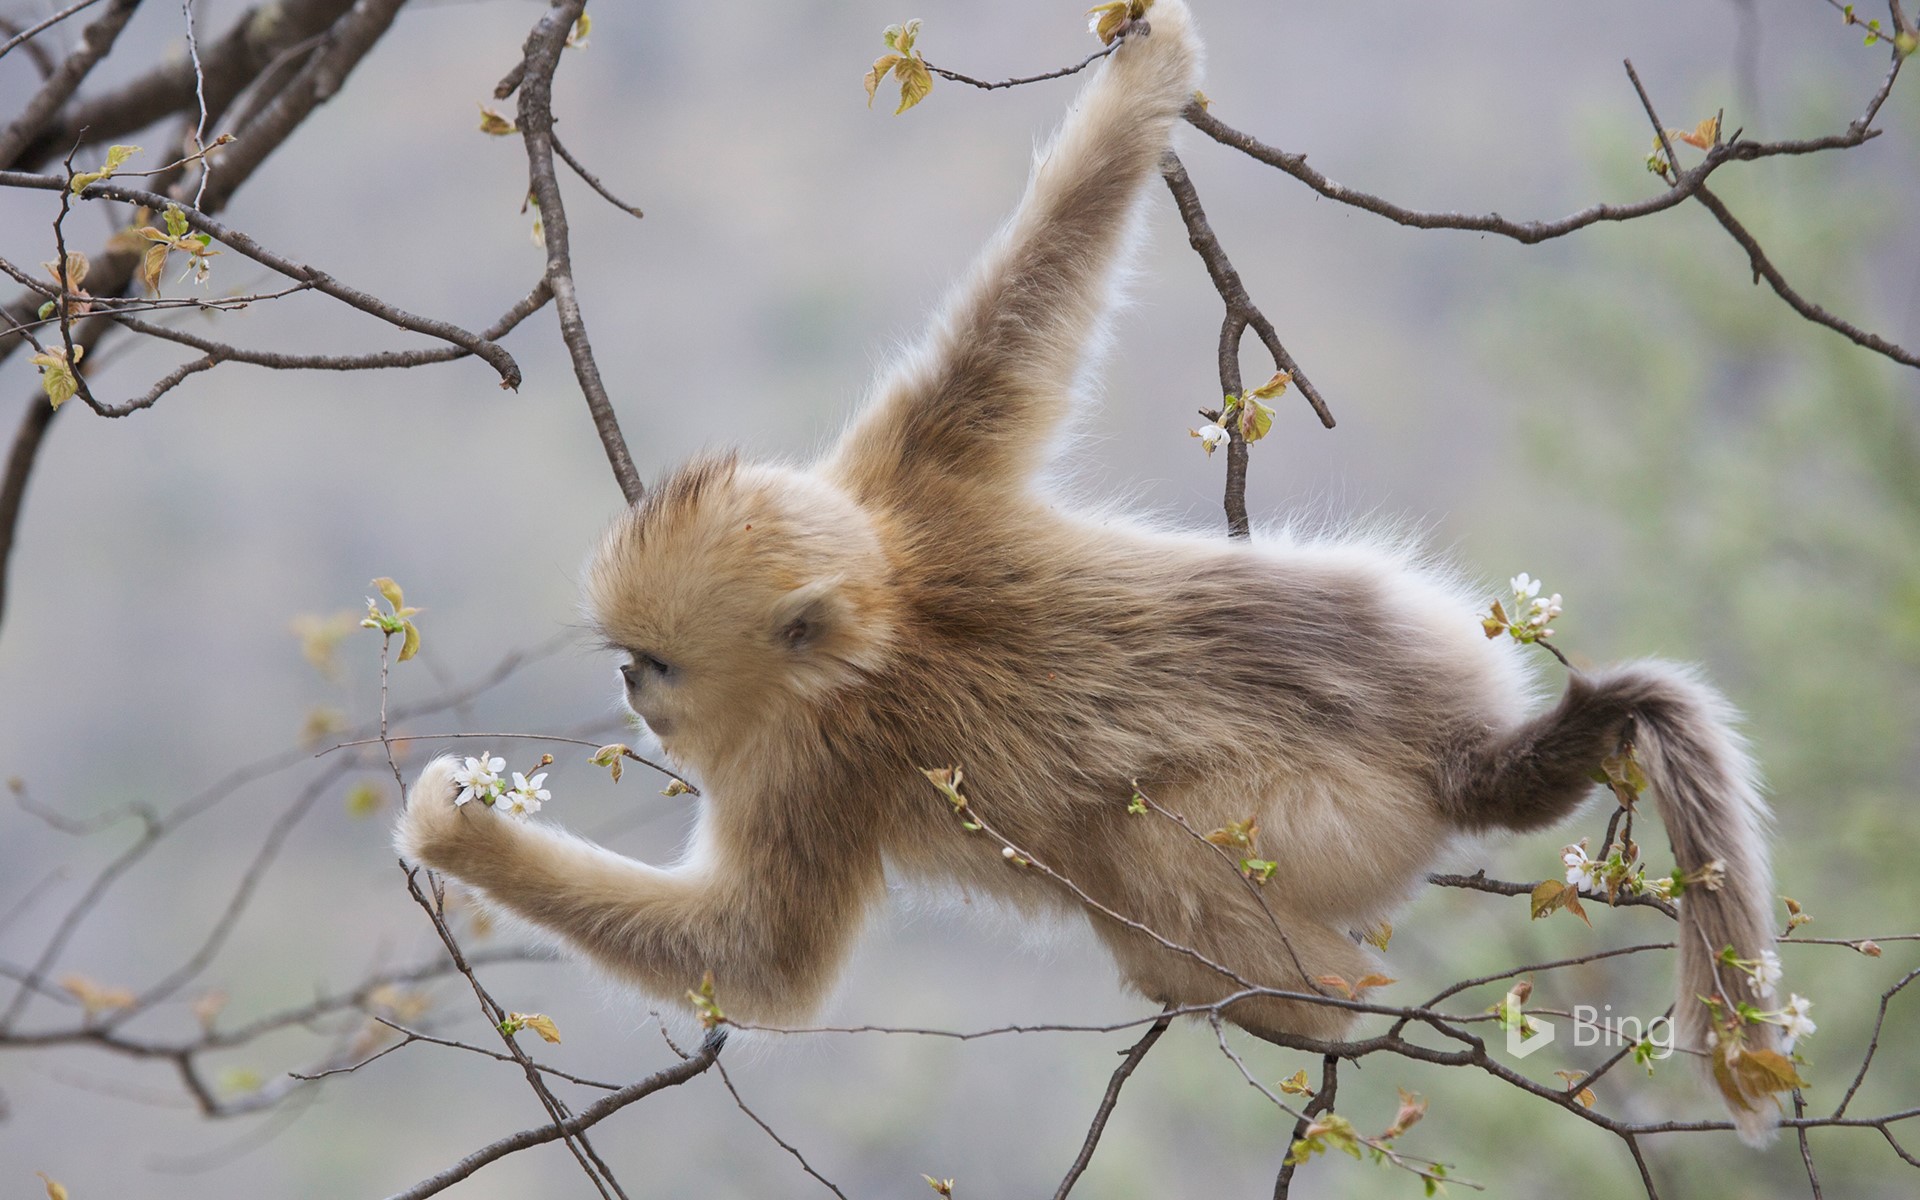 [Today's Spring] A golden monkey that feeds on cherry blossoms in Zhouzhi Nature Reserve, Qinling, Shaanxi, China